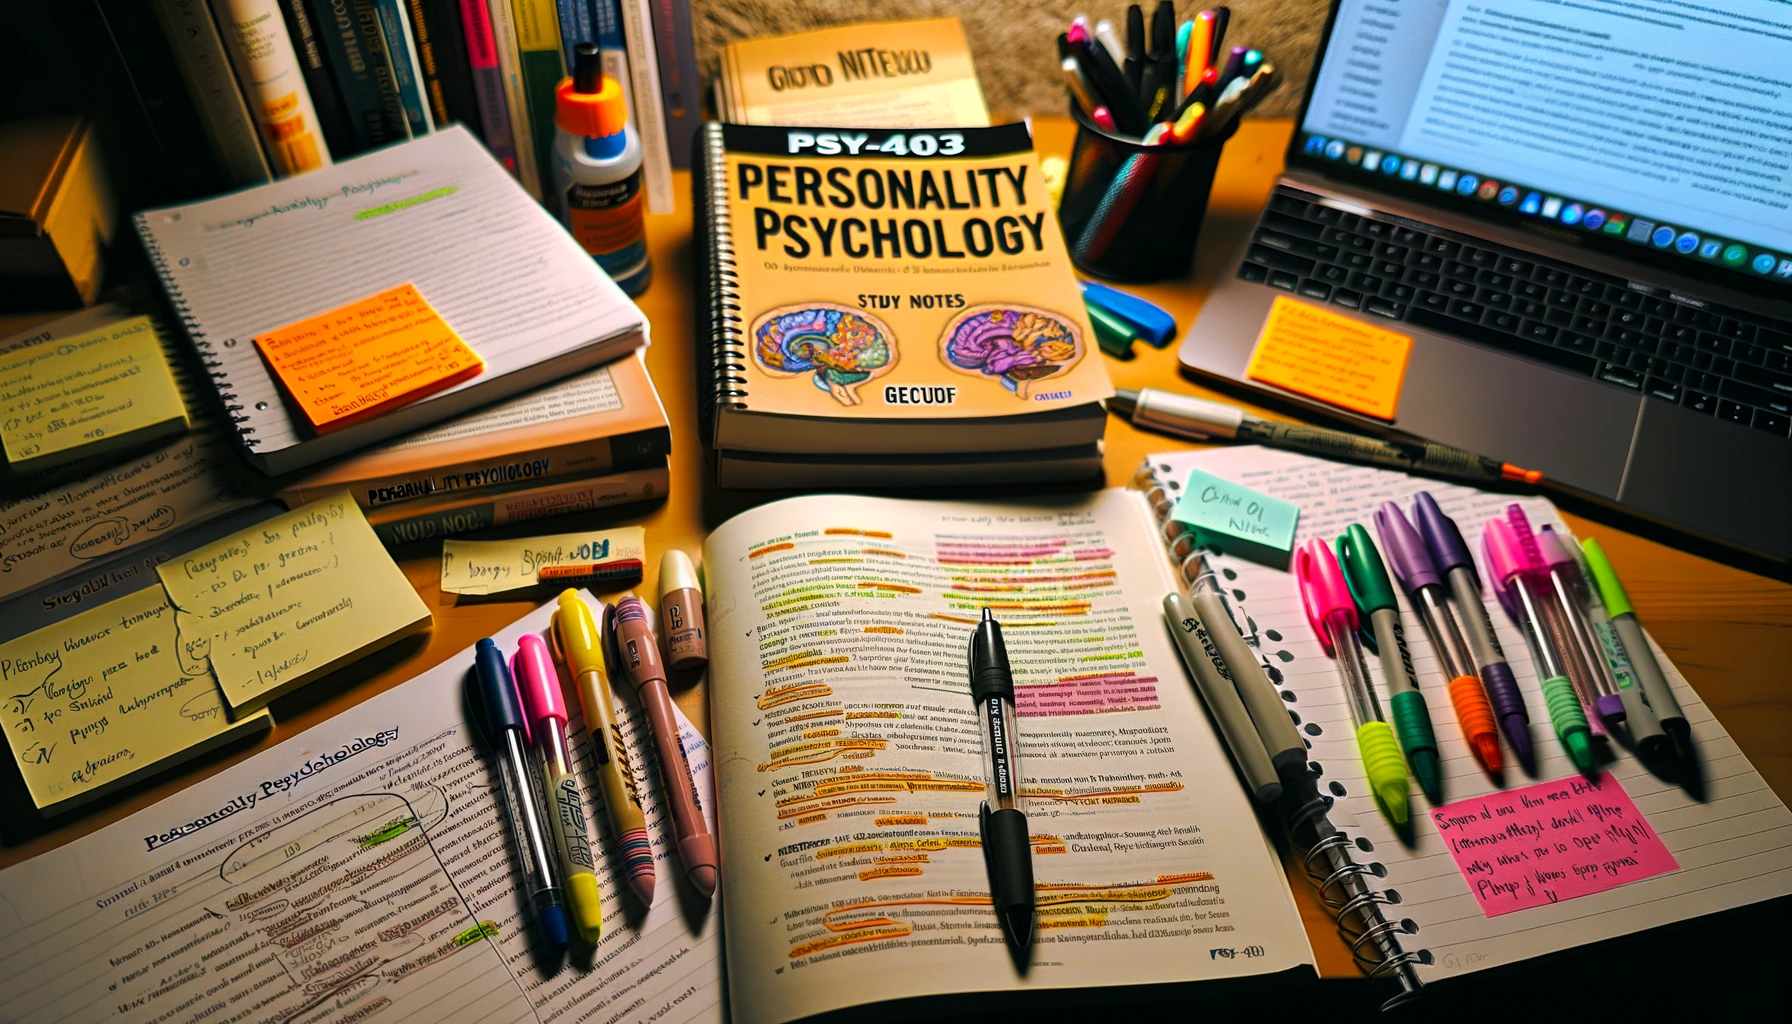 PSY-403 Personality Psychology Study Notes At GCUF